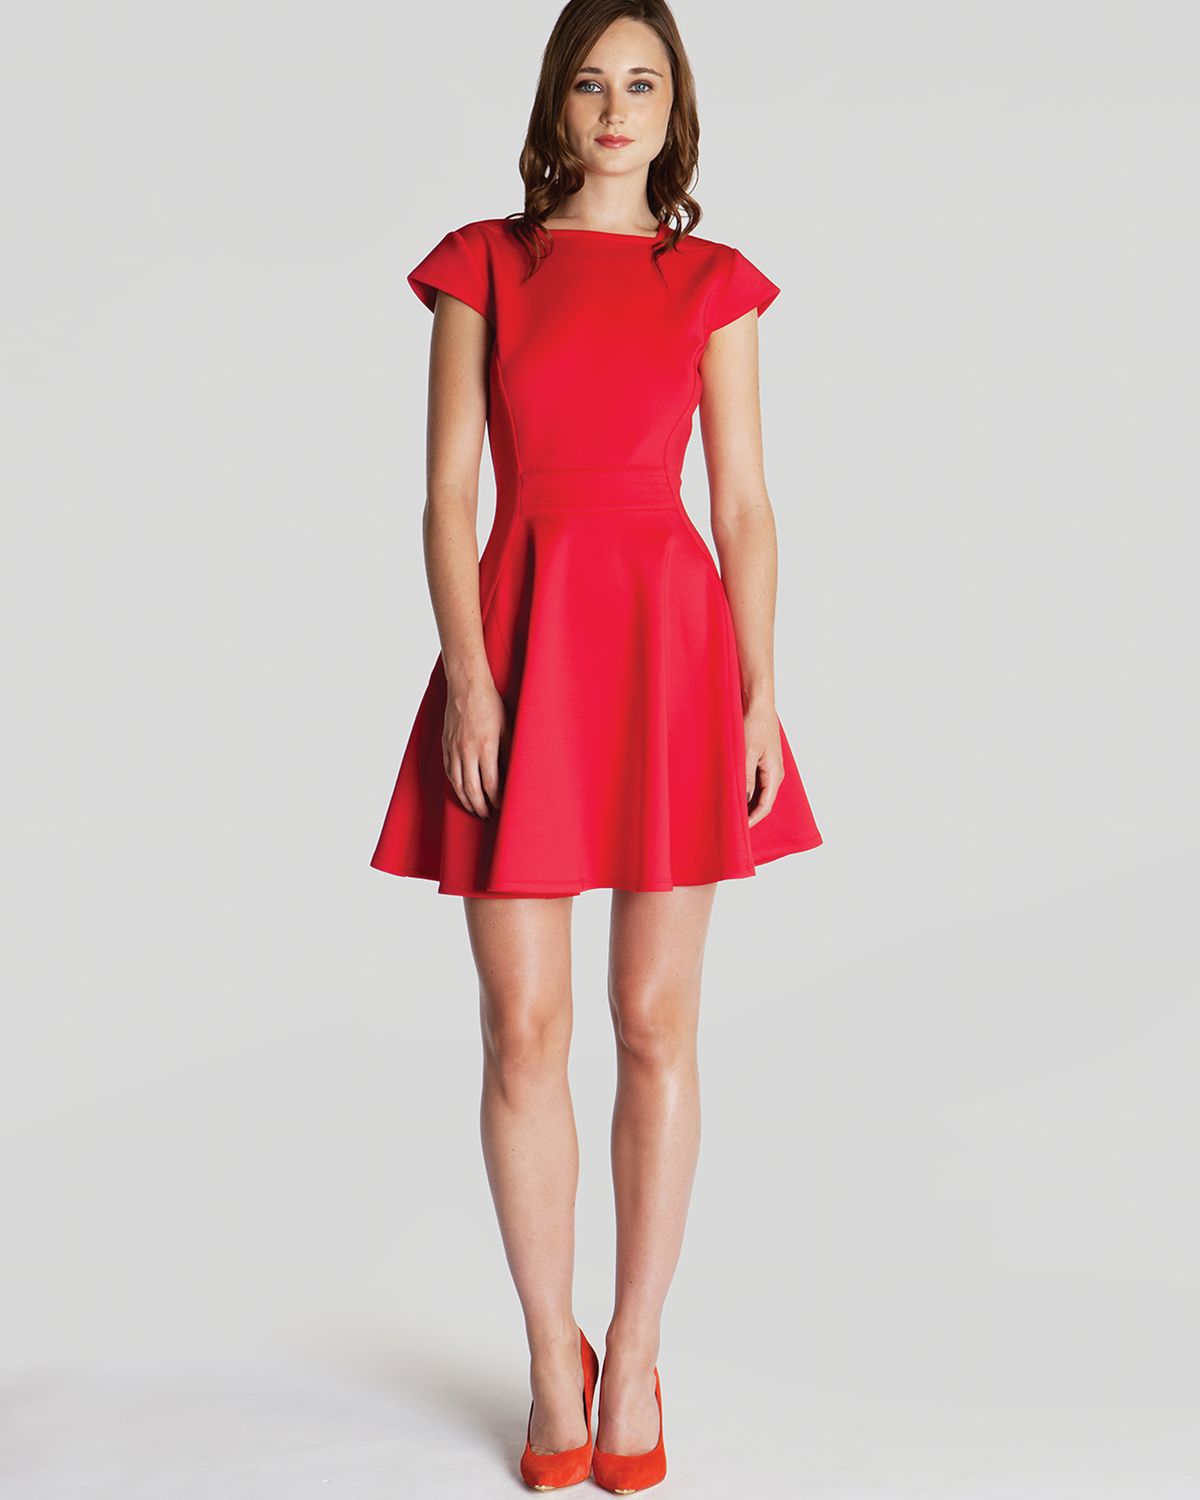 ted baker red skater dress - OFF-60% > Shipping free